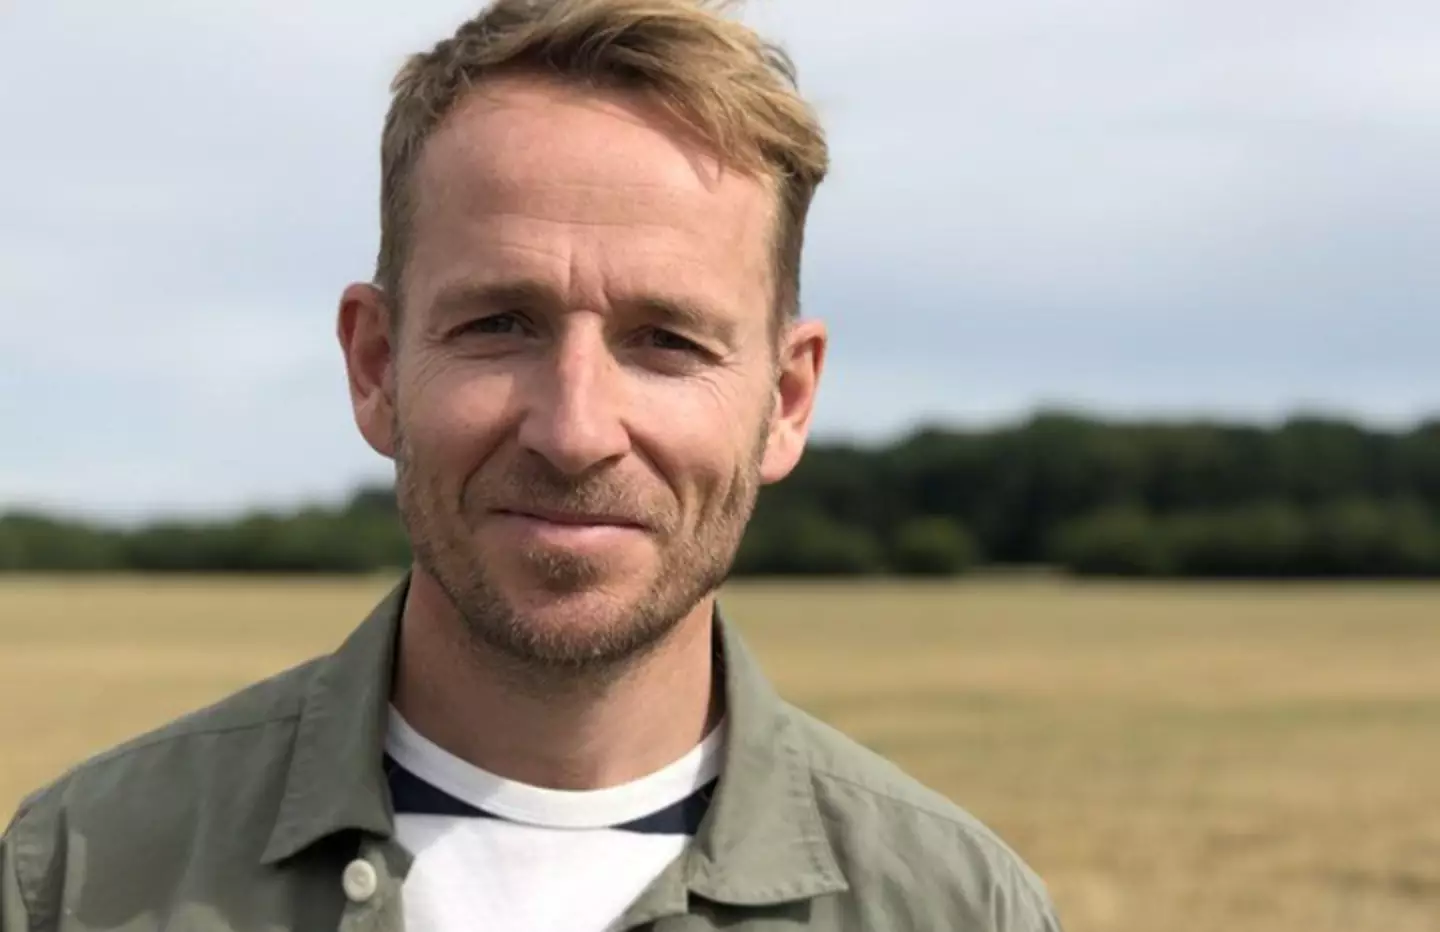 Jonnie Irwin is best known for presenting 'A Place in the Sun'.